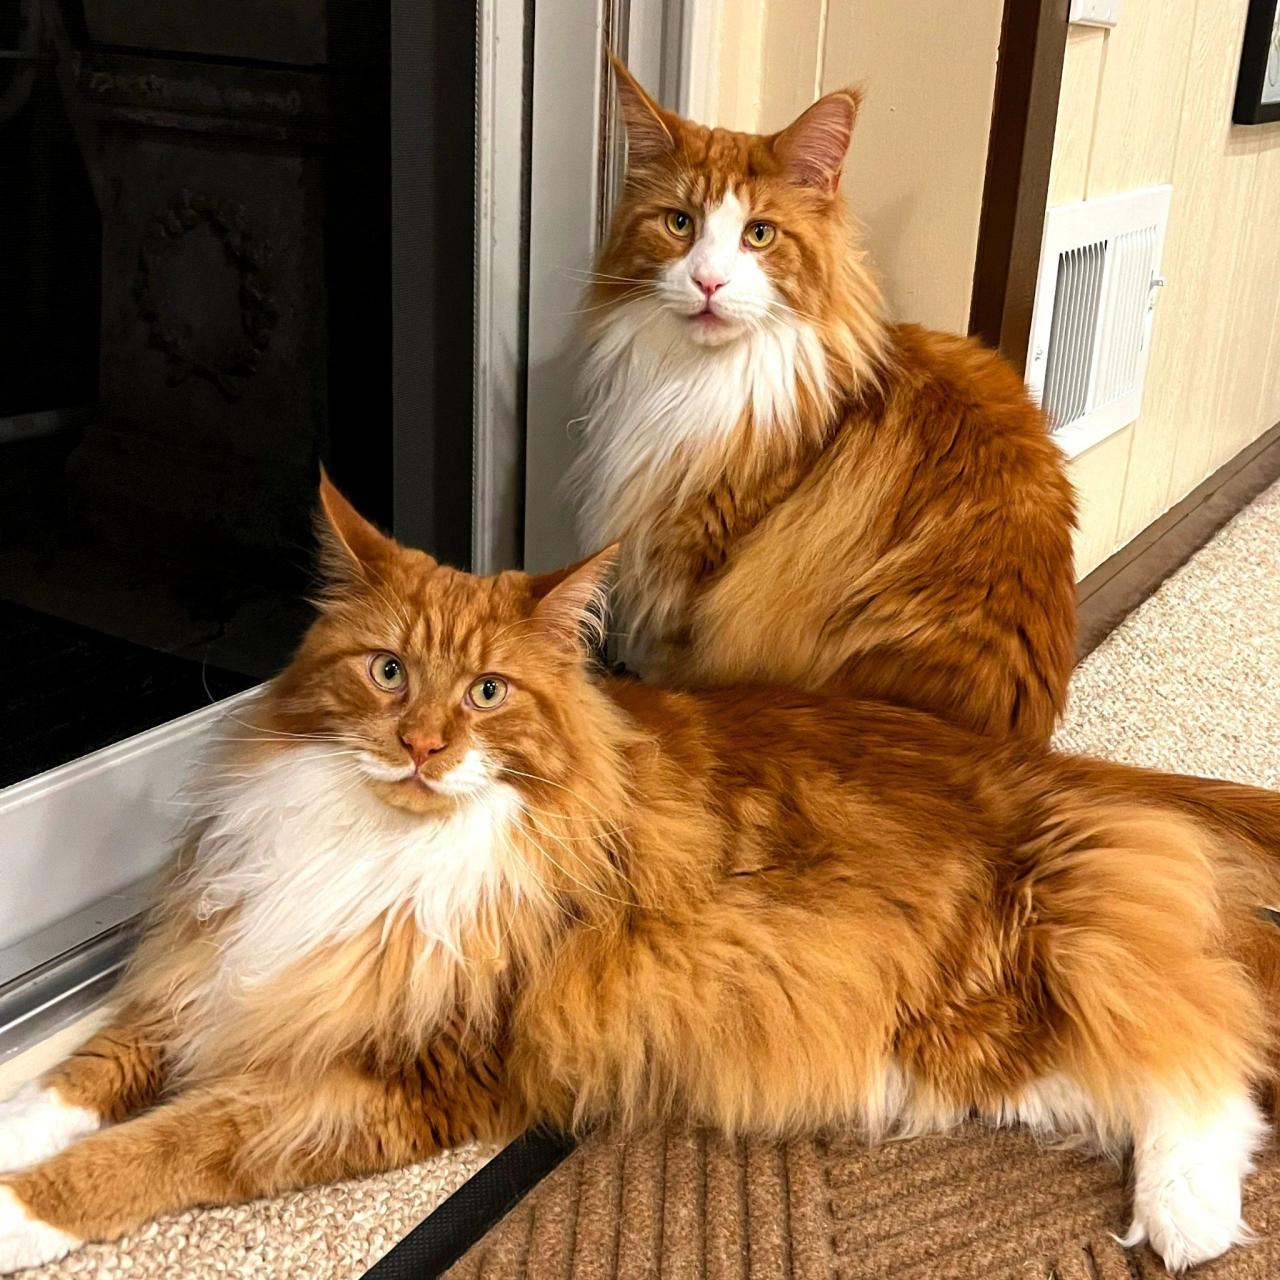 Giant maine coon kittens